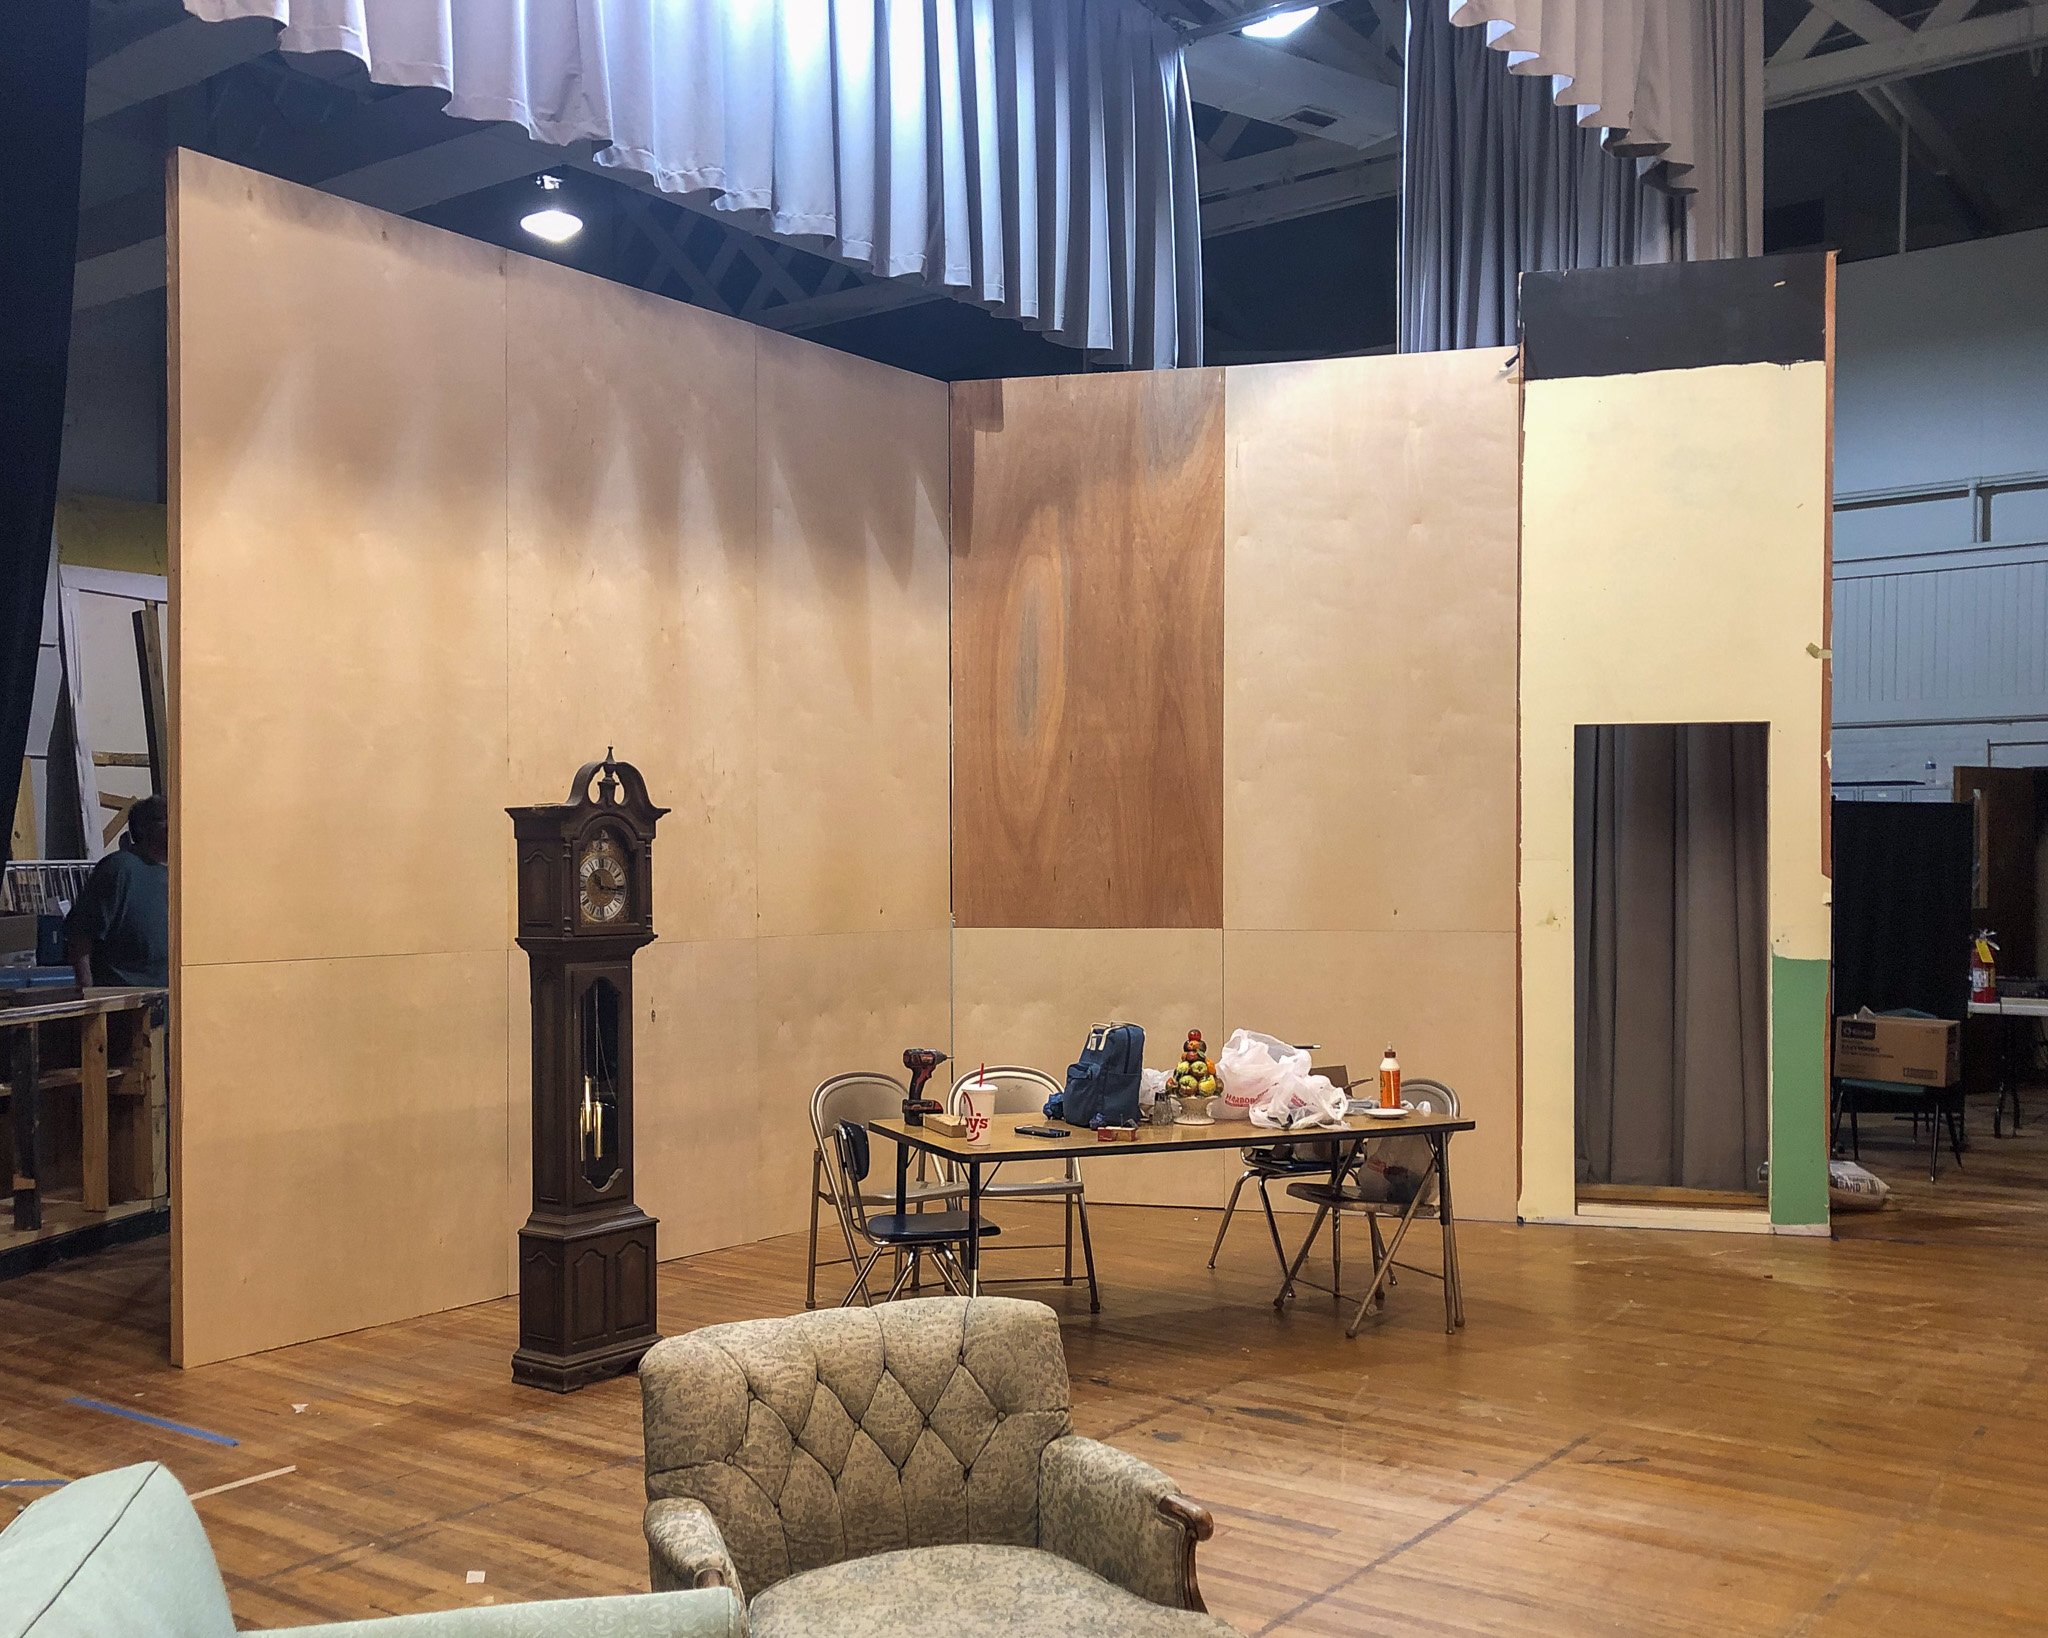 Set construction for &quot;The Last Night of Ballyhoo&quot; began last night! Our construction crew placed our newly constructed flats on stage to form the beginnings of the living room and dining room of the Freitag family. We are excited for you to